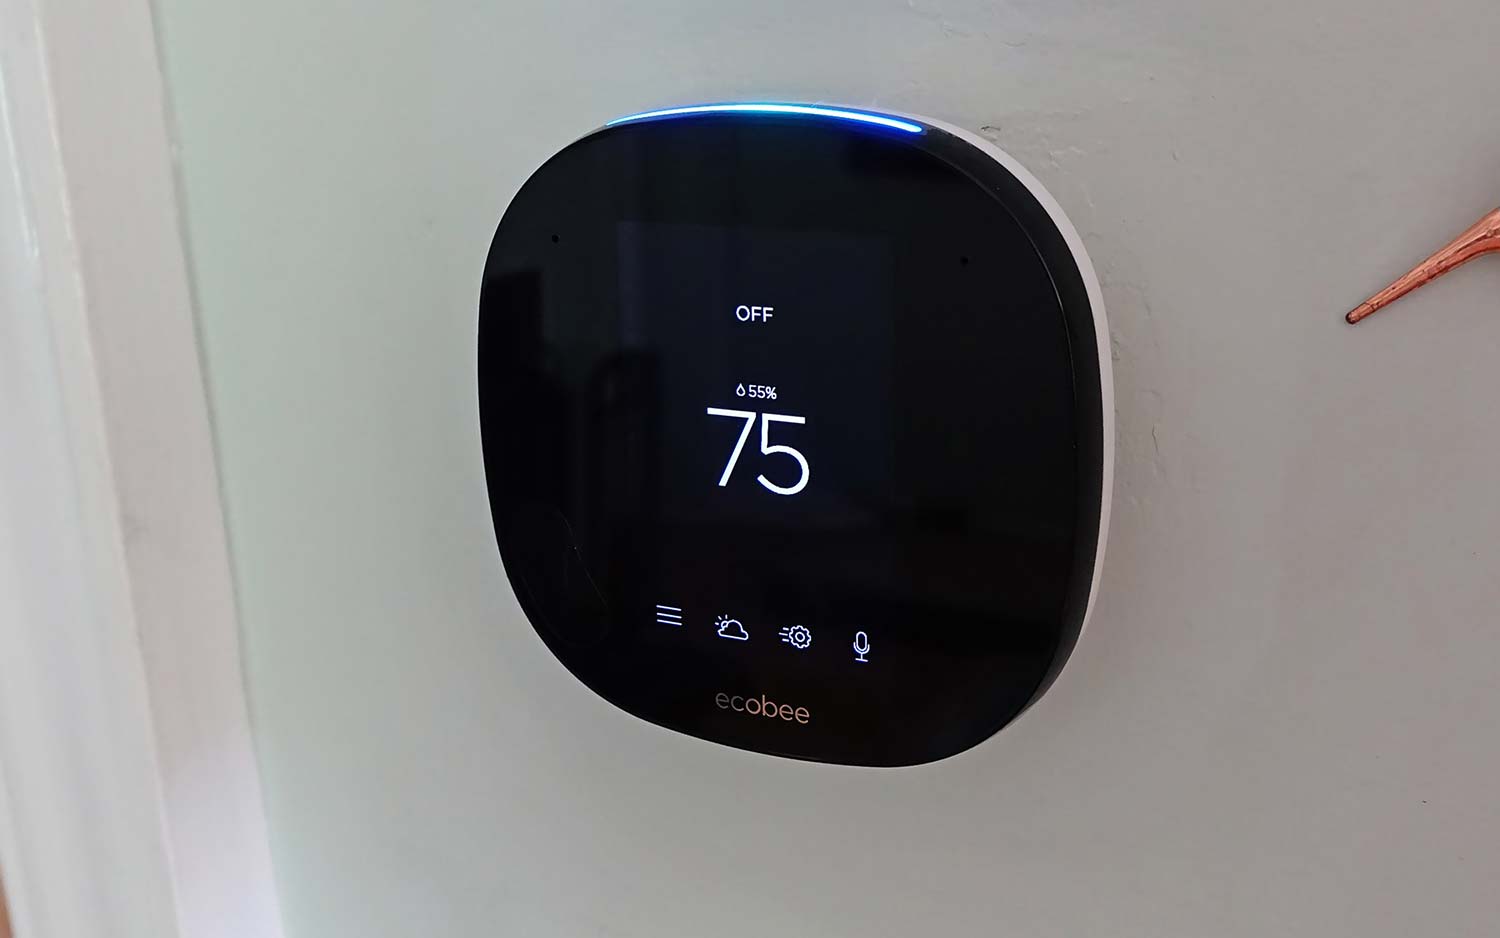 How To Use The Ecobee Smart Thermostat